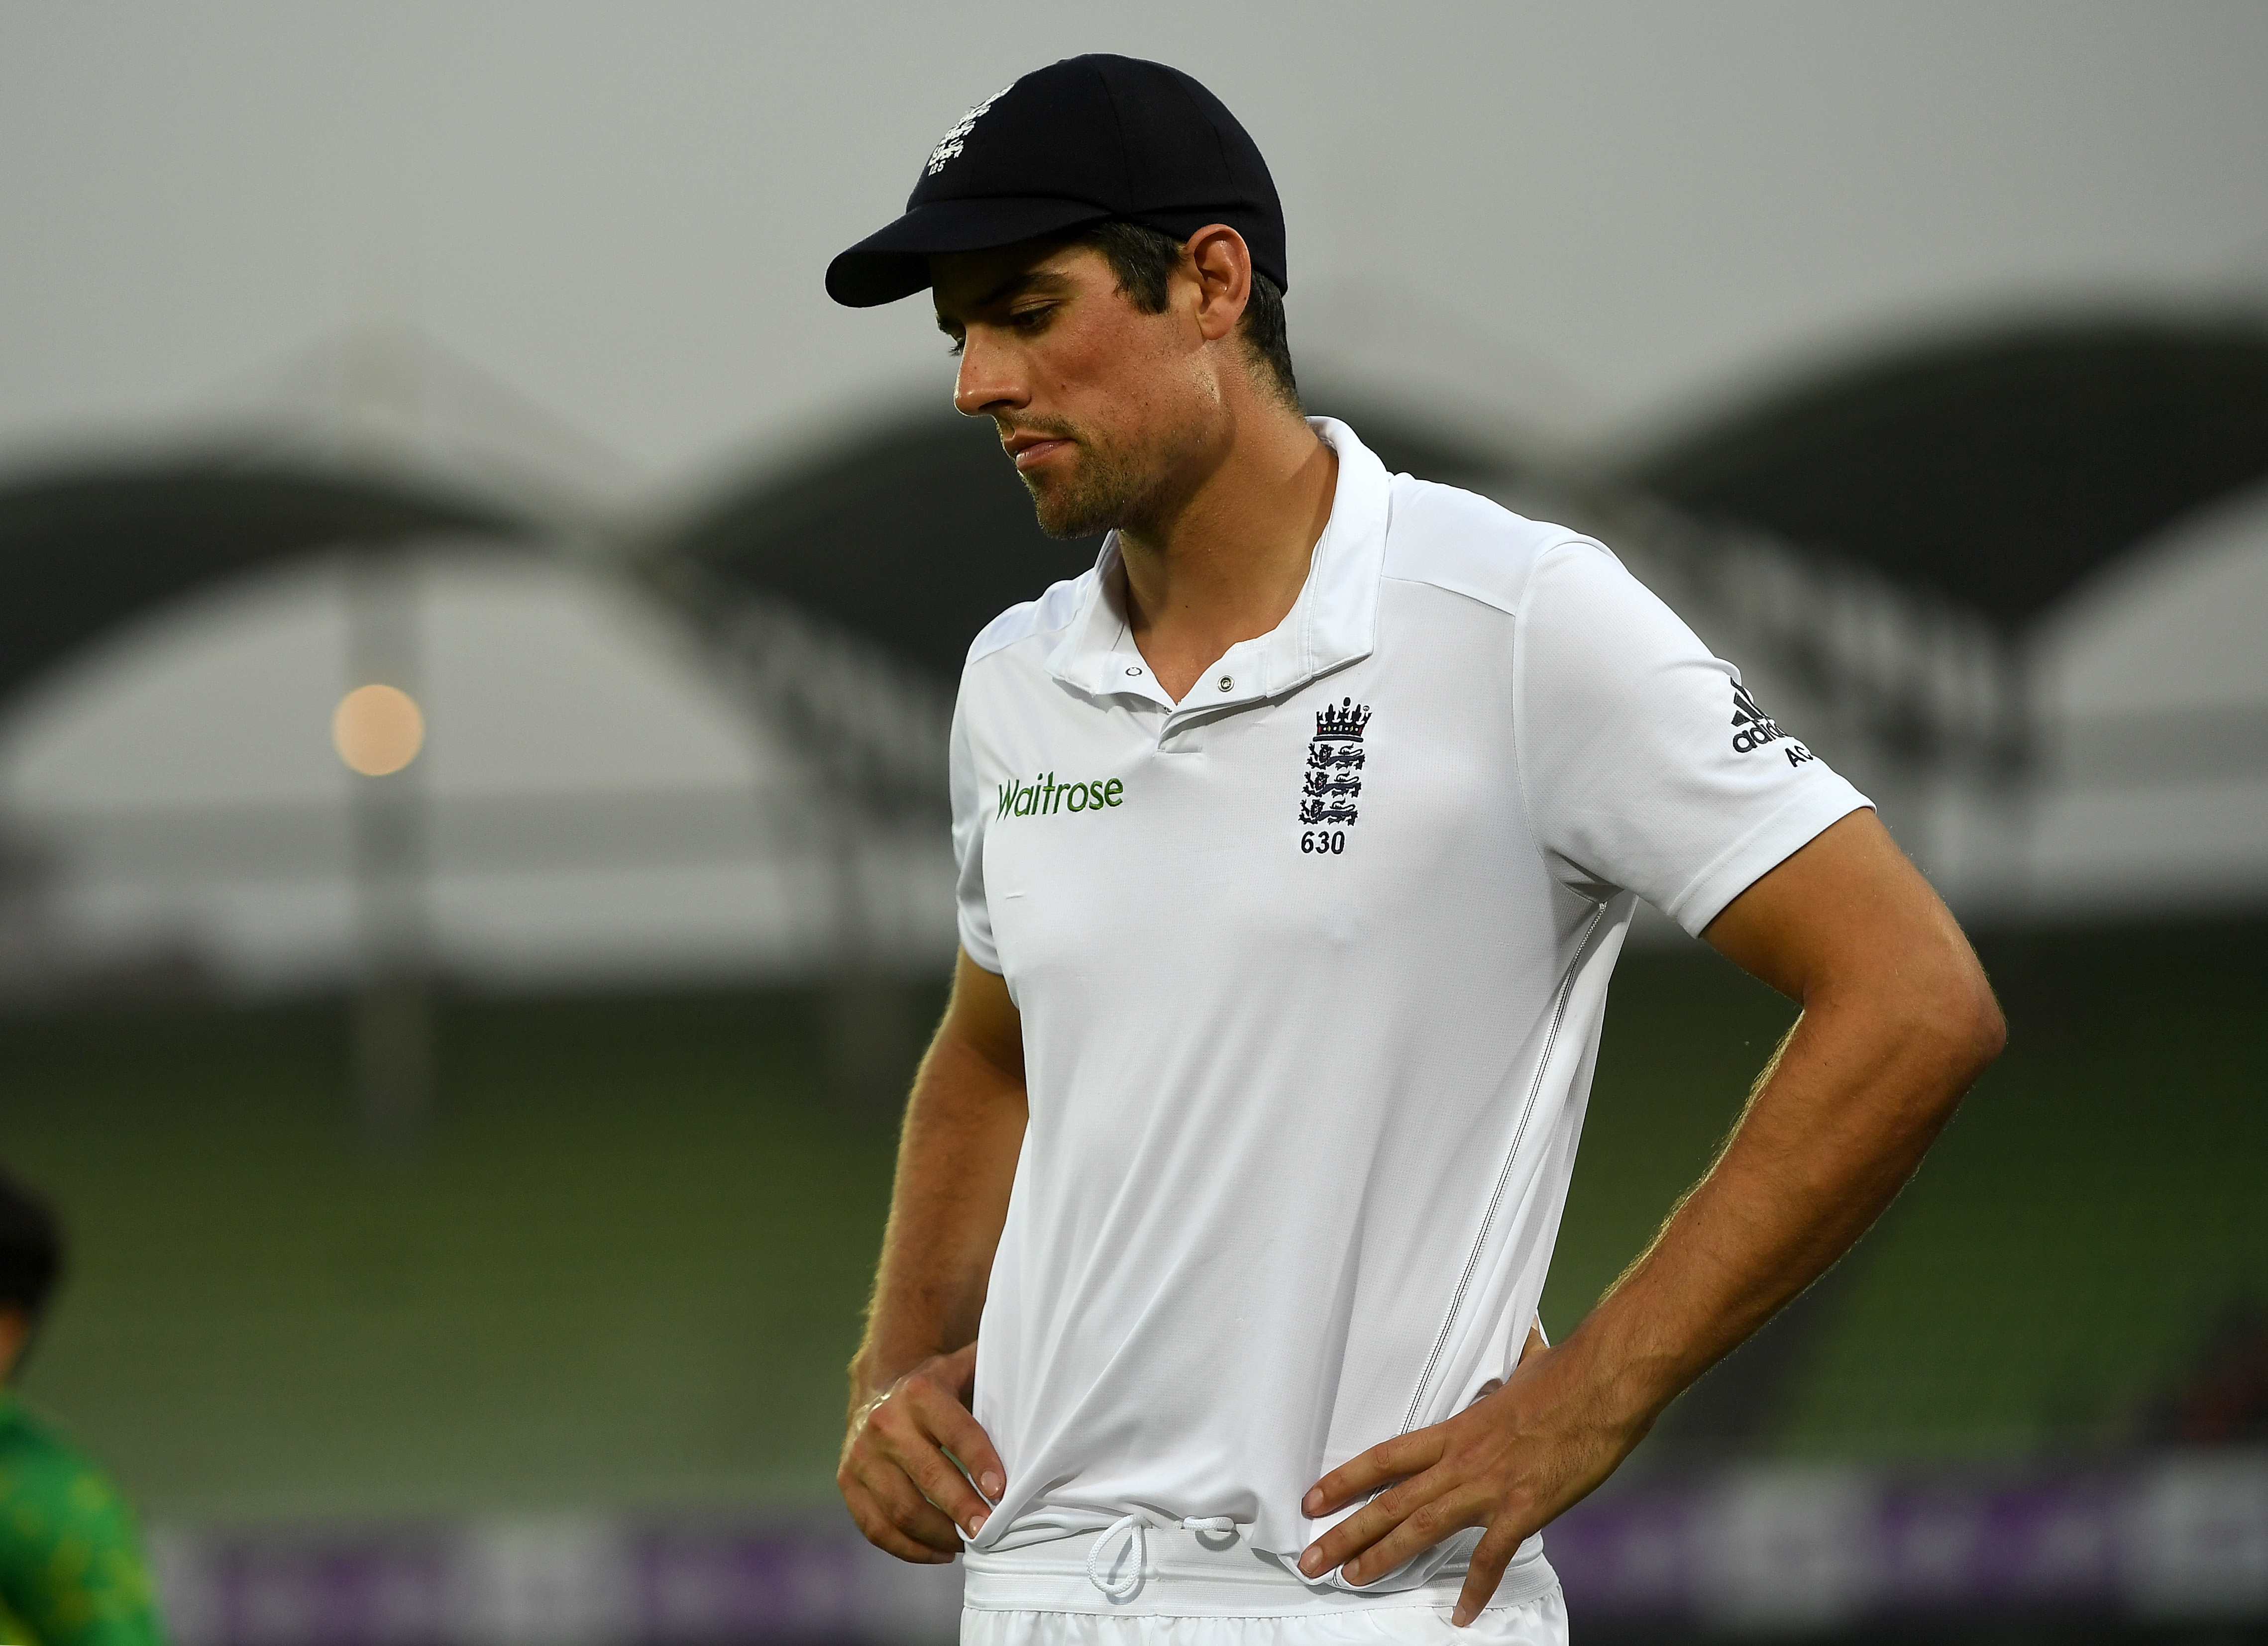 Does Alastair Cook deserve to be booted off from captaincy?